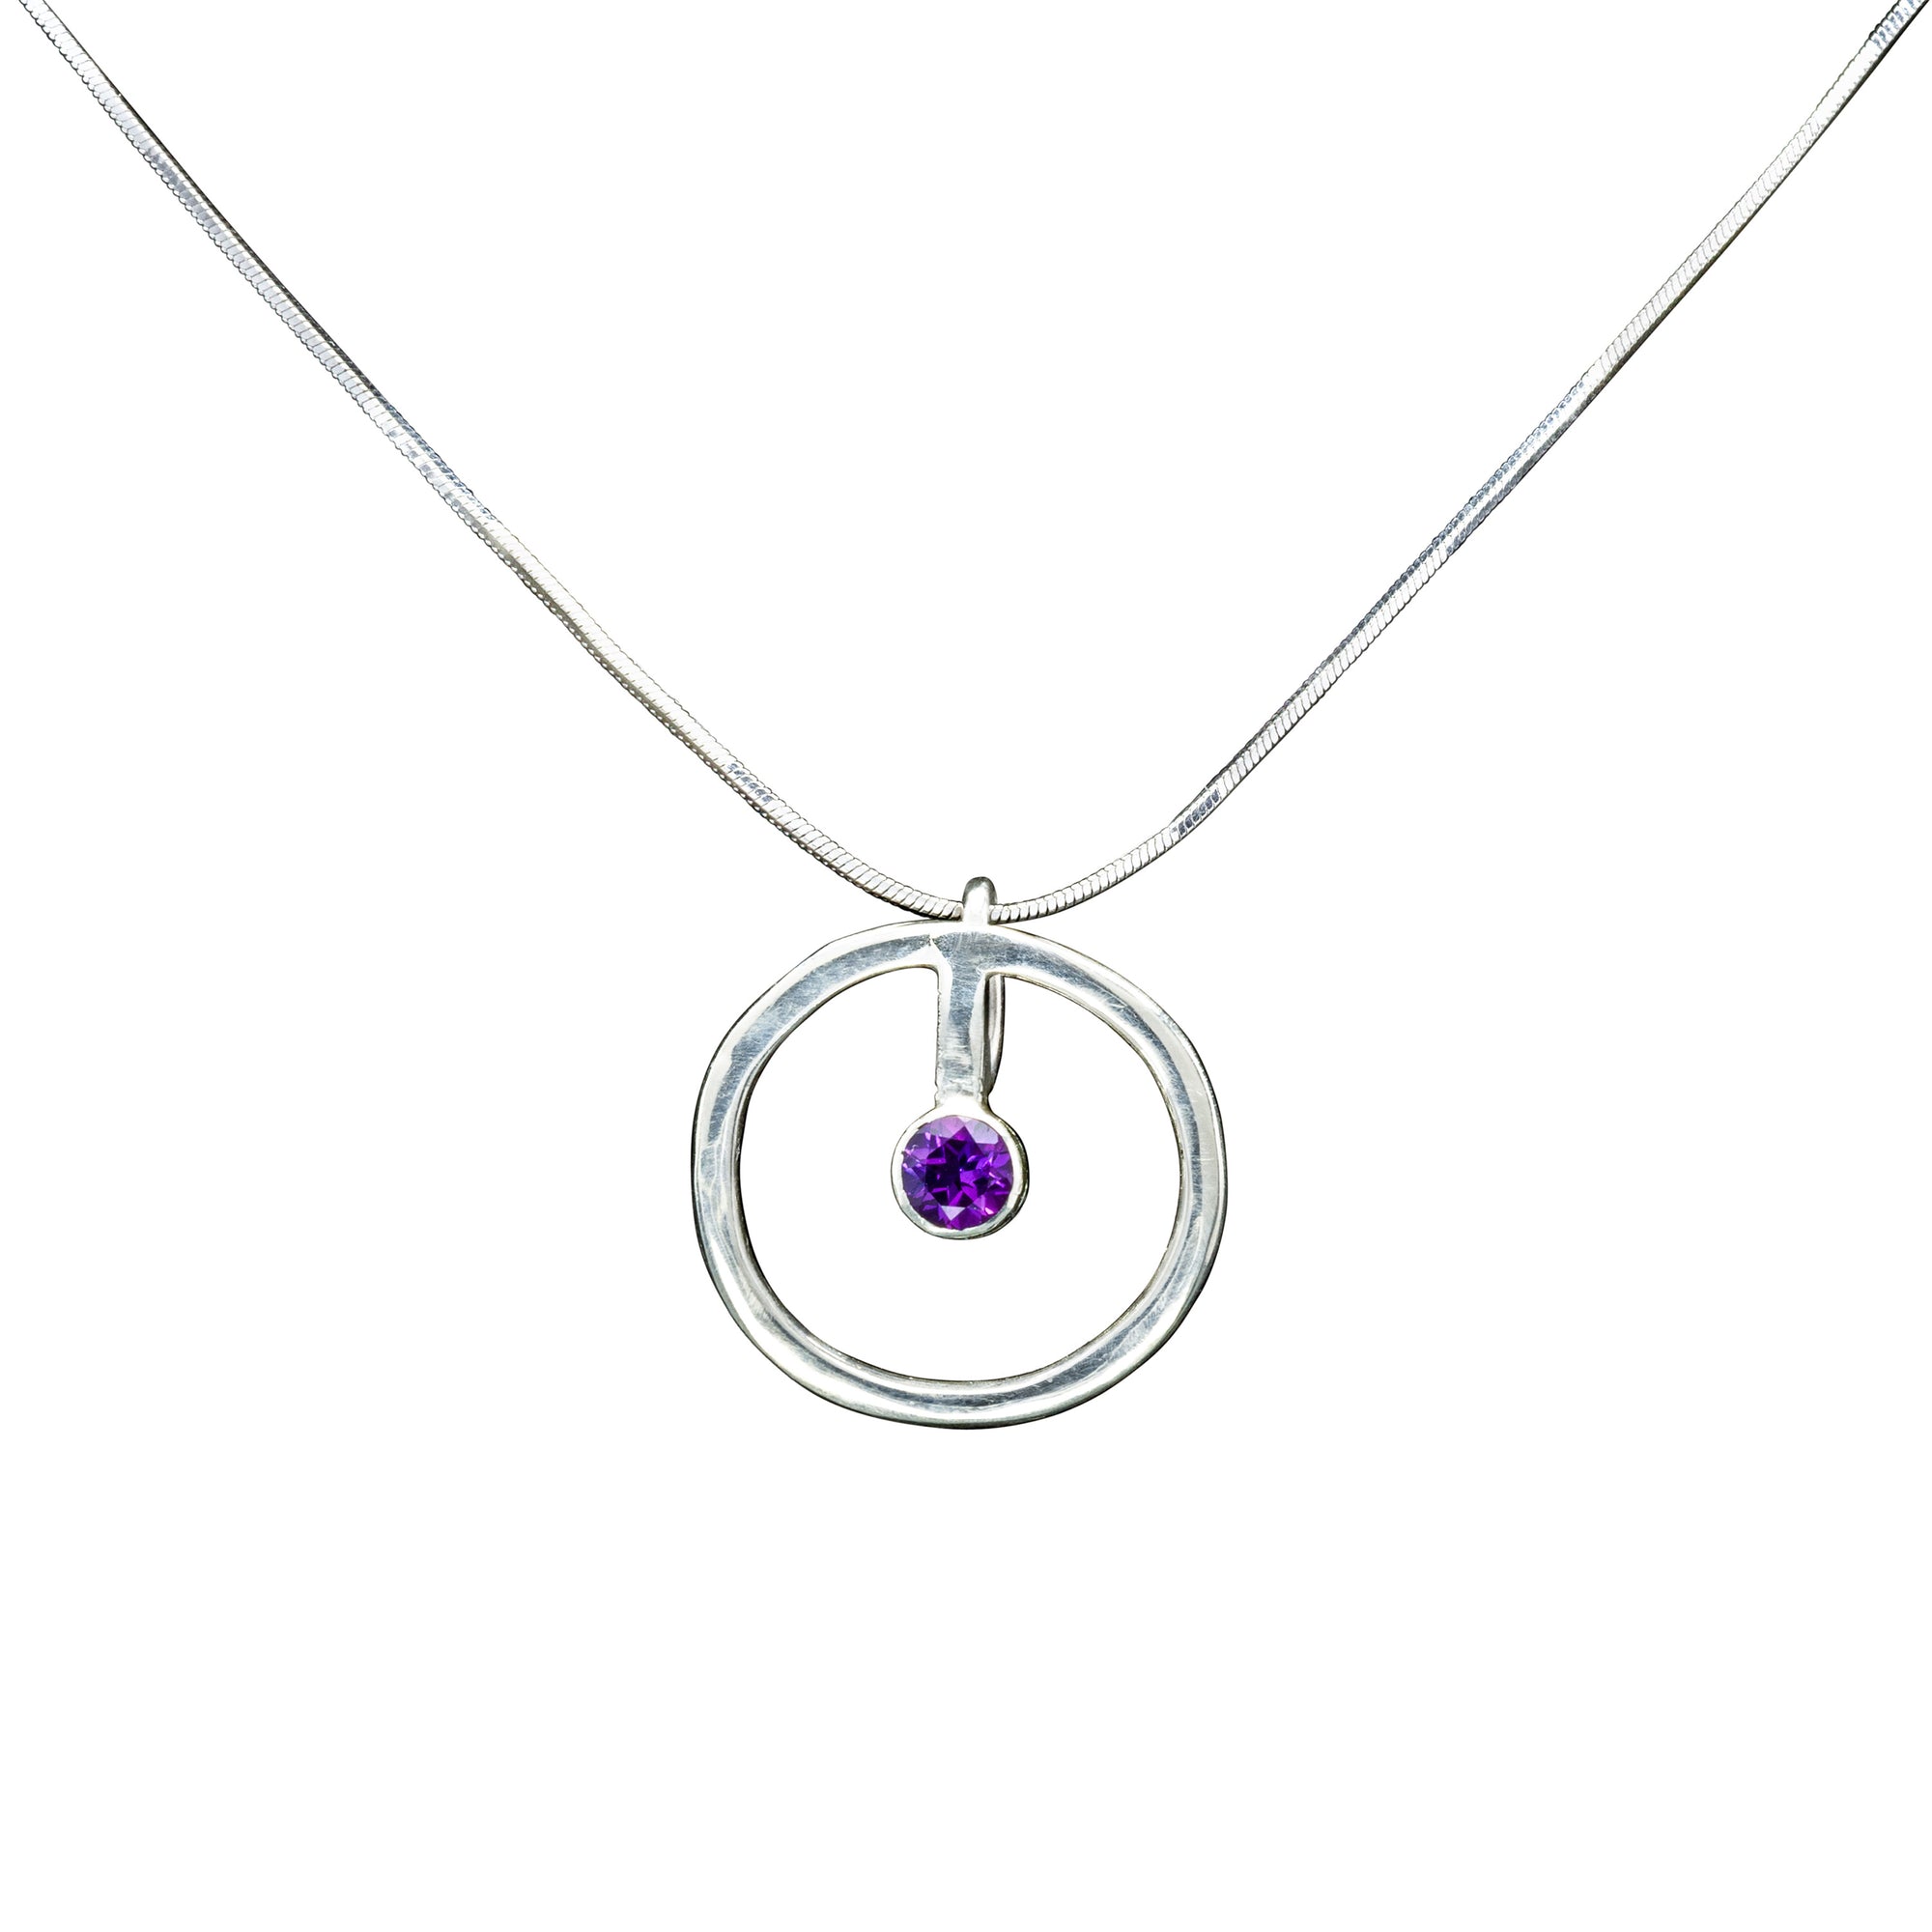 Kaia Sterling Silver Necklace, Amethyst